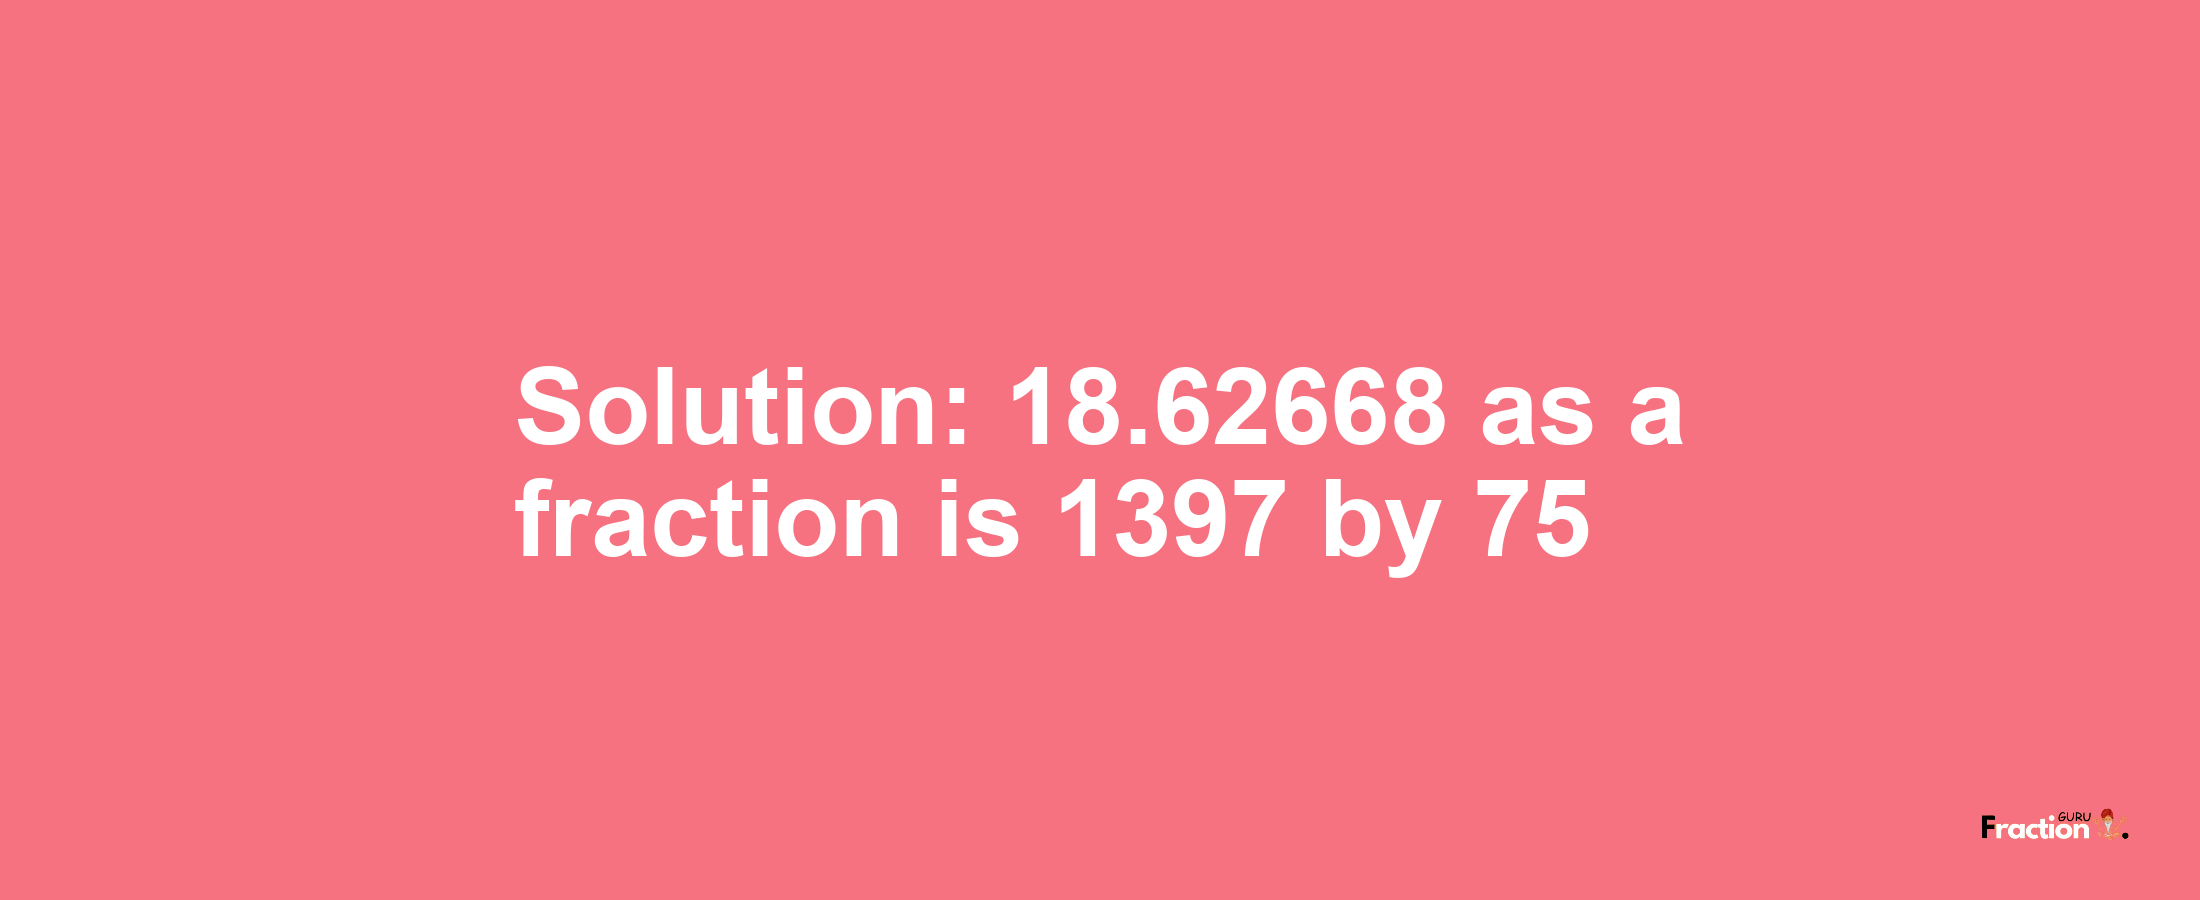 Solution:18.62668 as a fraction is 1397/75